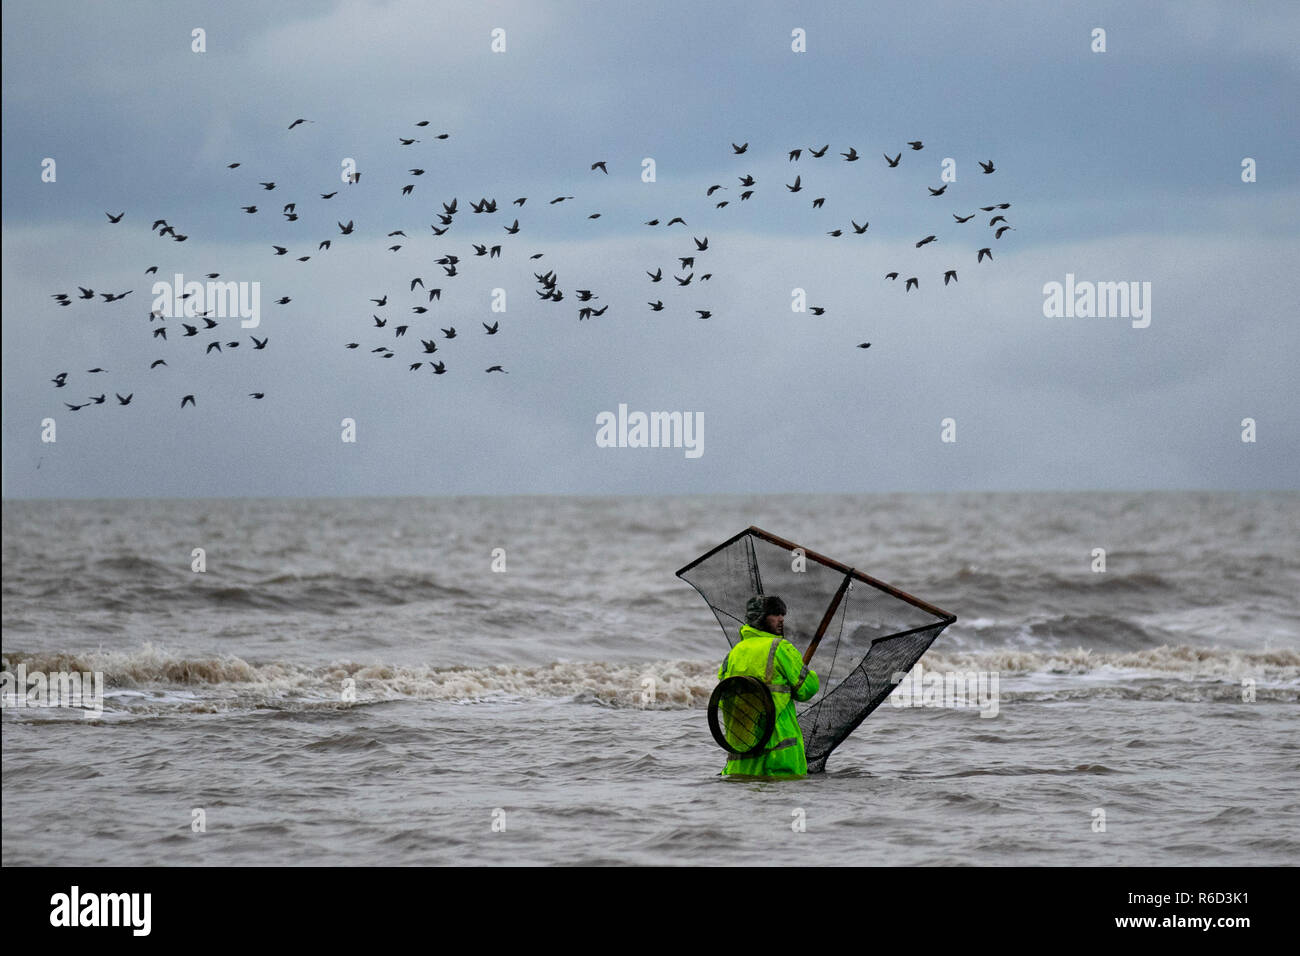 https://c8.alamy.com/comp/R6D3K1/shrimp-fisherman-in-blackpool-lancashire-dec-2018-uk-weather-grey-skies-as-push-net-shrimp-fishermen-trawl-the-shoreline-shrimp-push-nets-are-ideal-for-shrimping-and-prawning-but-locals-find-only-small-yields-blaming-the-water-quality-which-is-considered-too-clean-R6D3K1.jpg